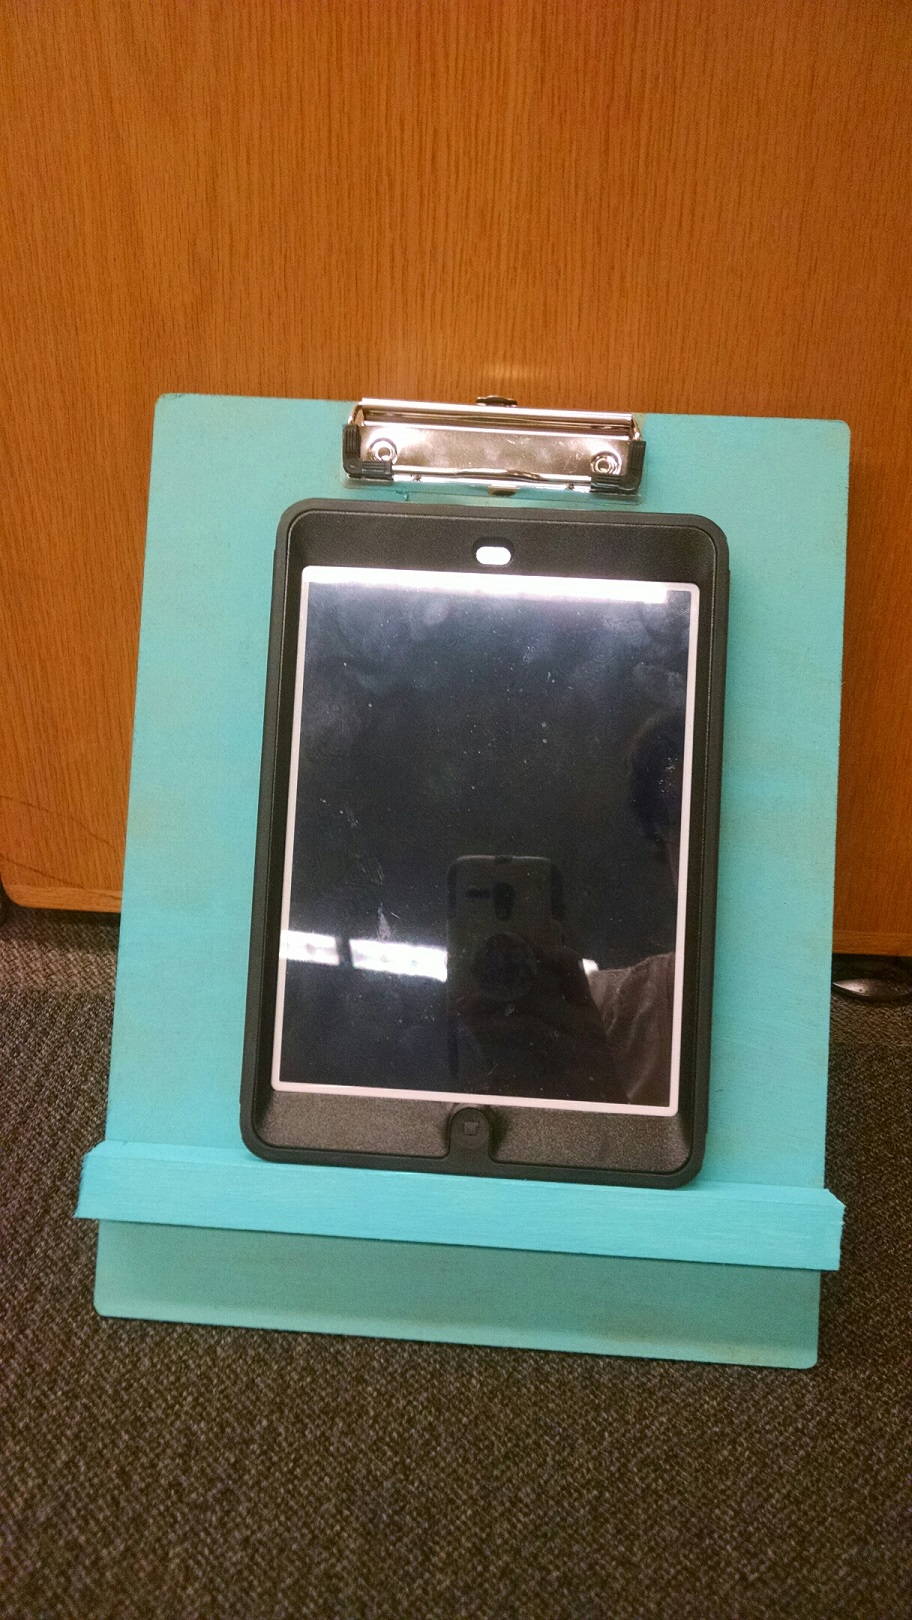 A recipe stand with a tablet on it.